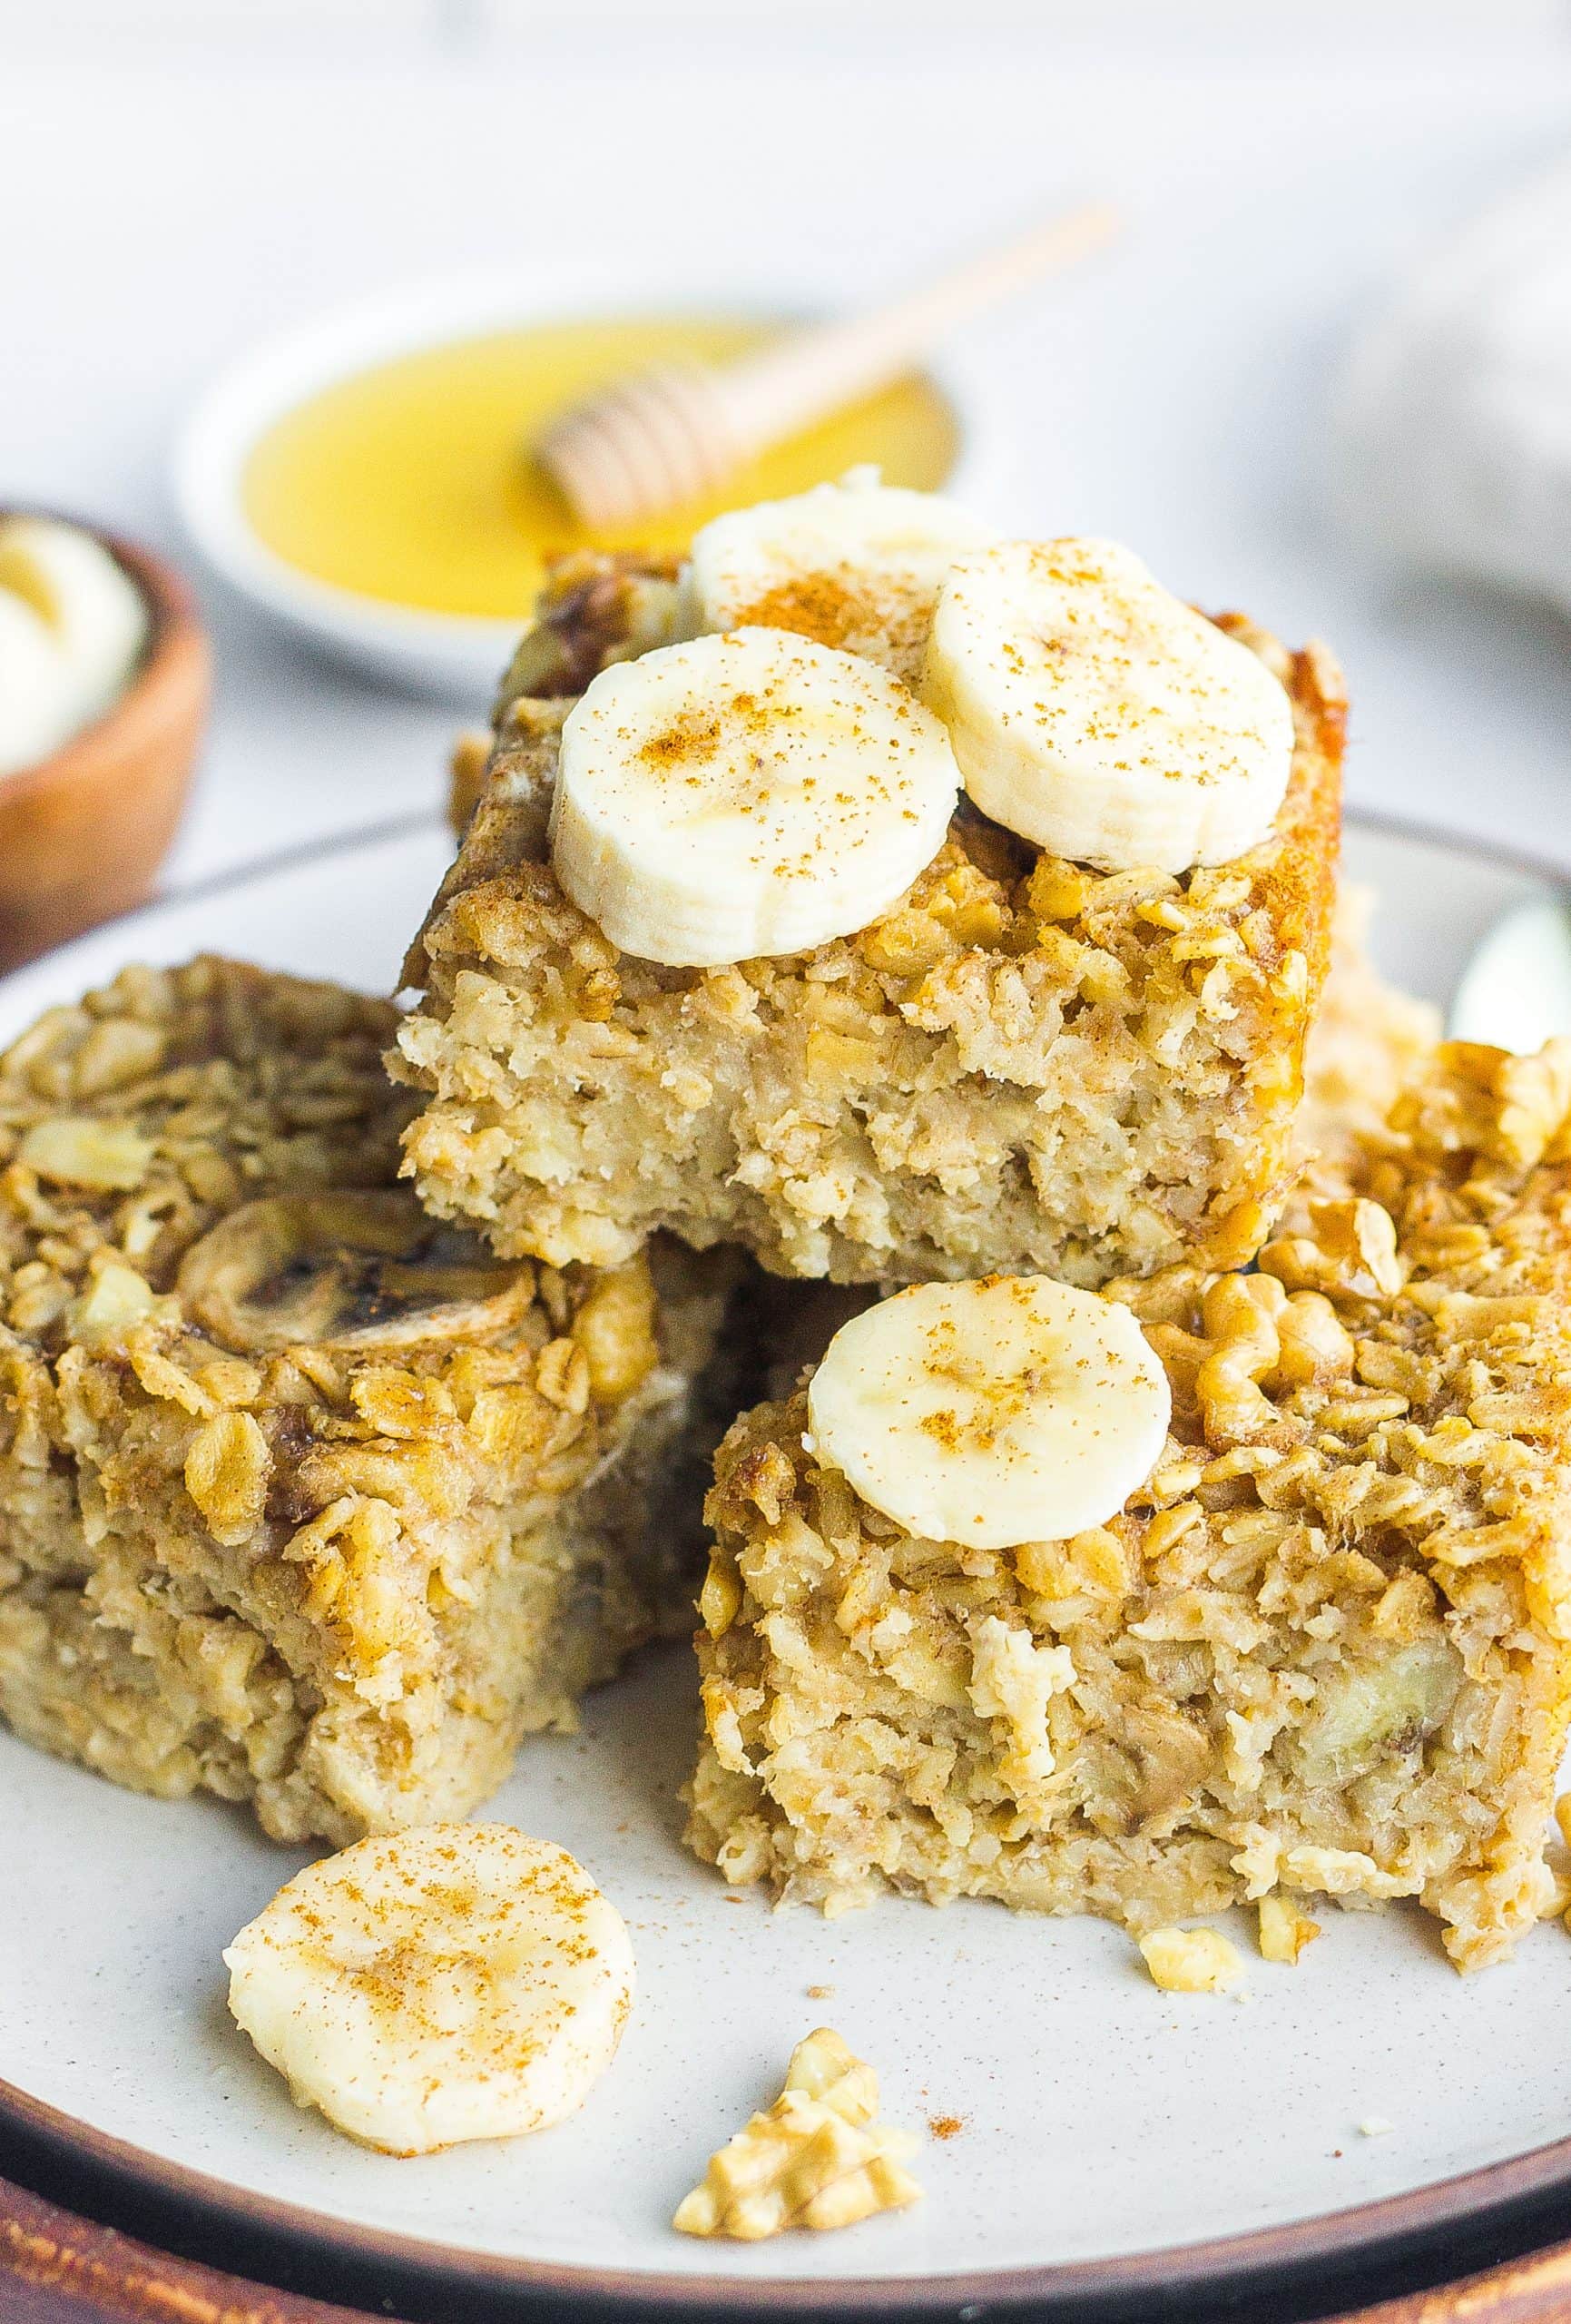 baked oatmeal on plate with sliced bananas